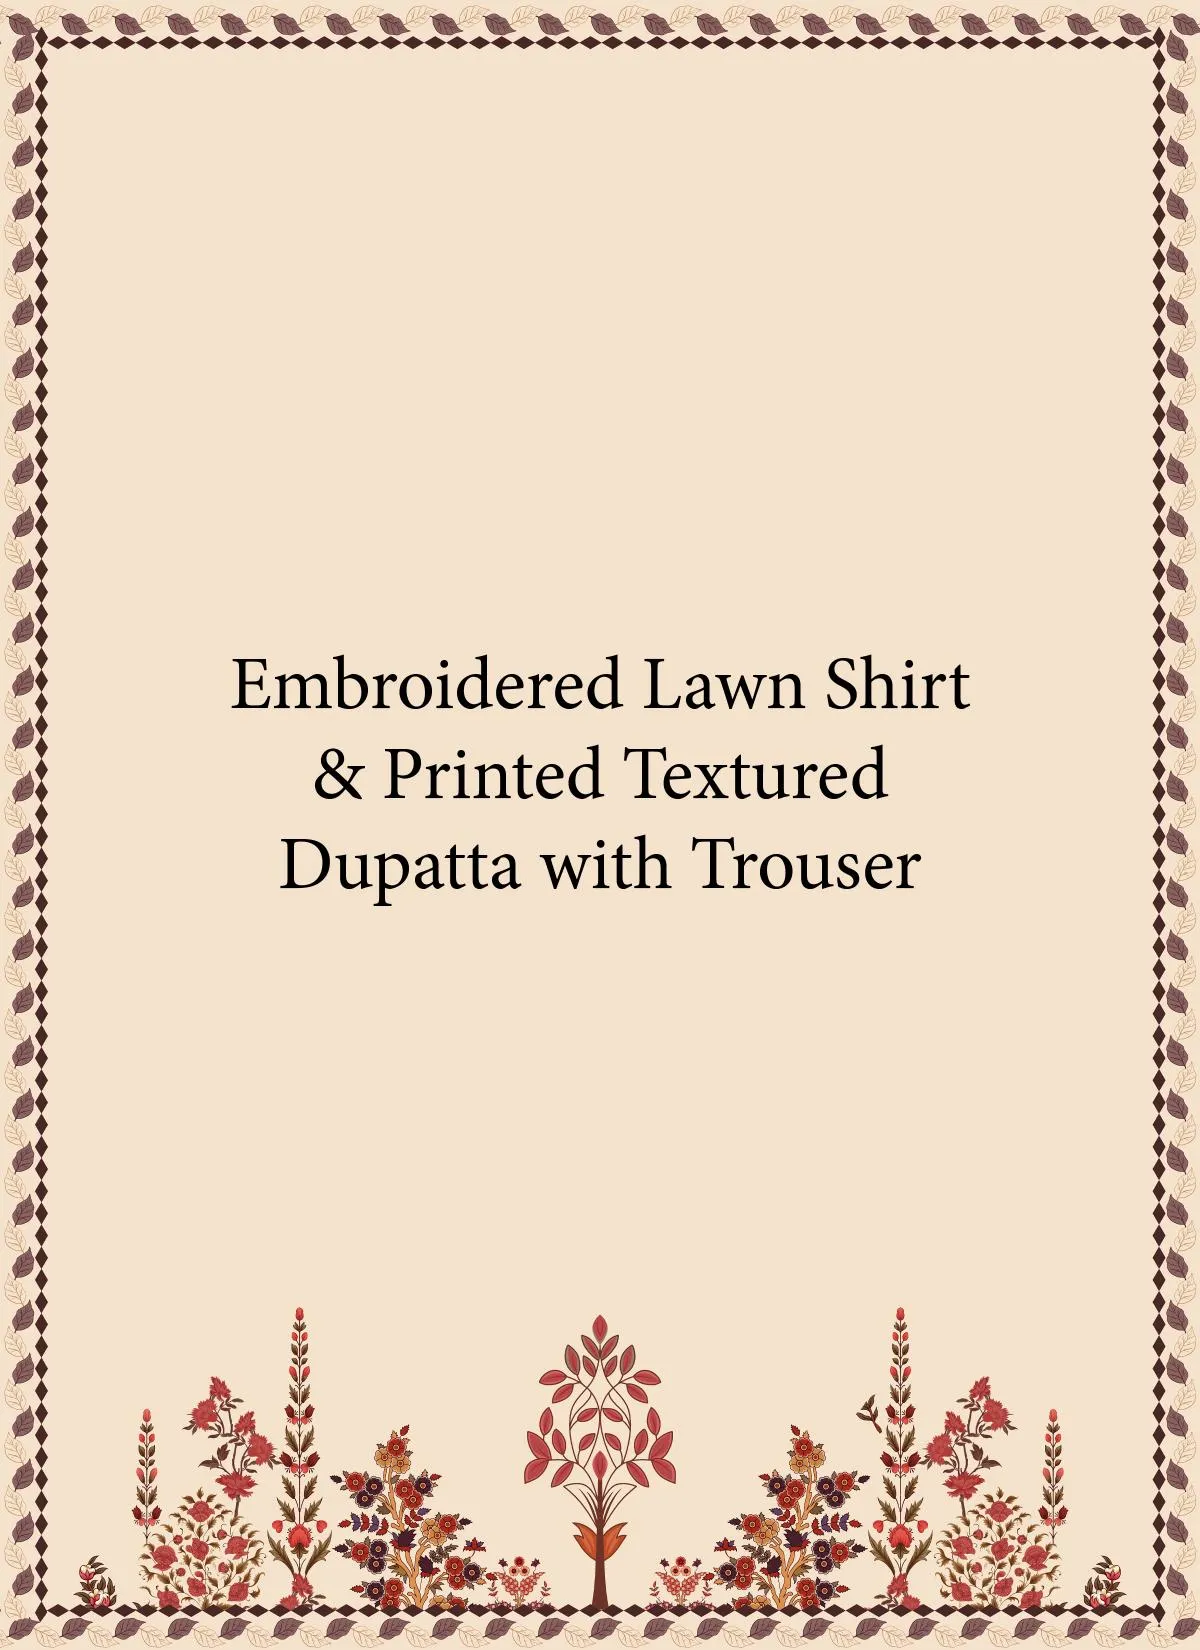 Embroidered lawn shirt and printed textured dupatta with trouser